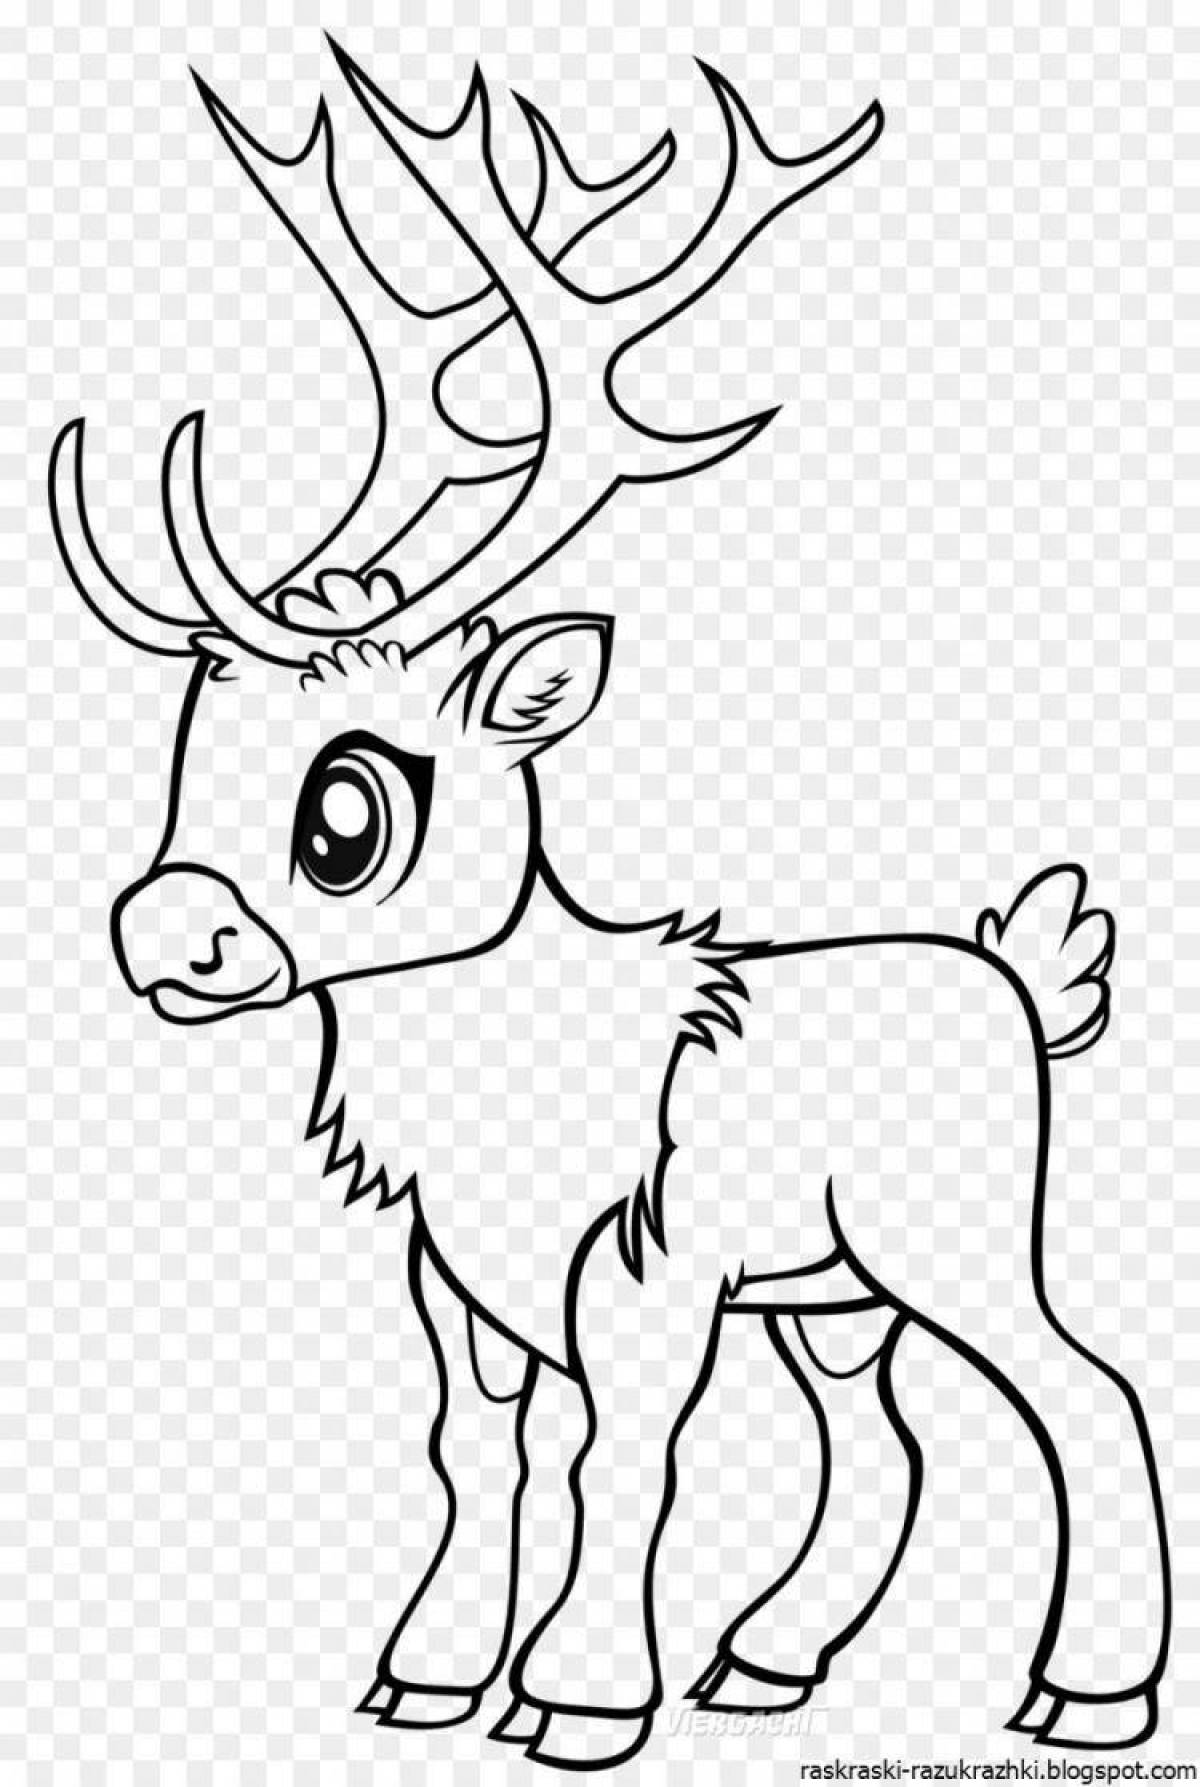 A fascinating deer coloring book for children 3-4 years old